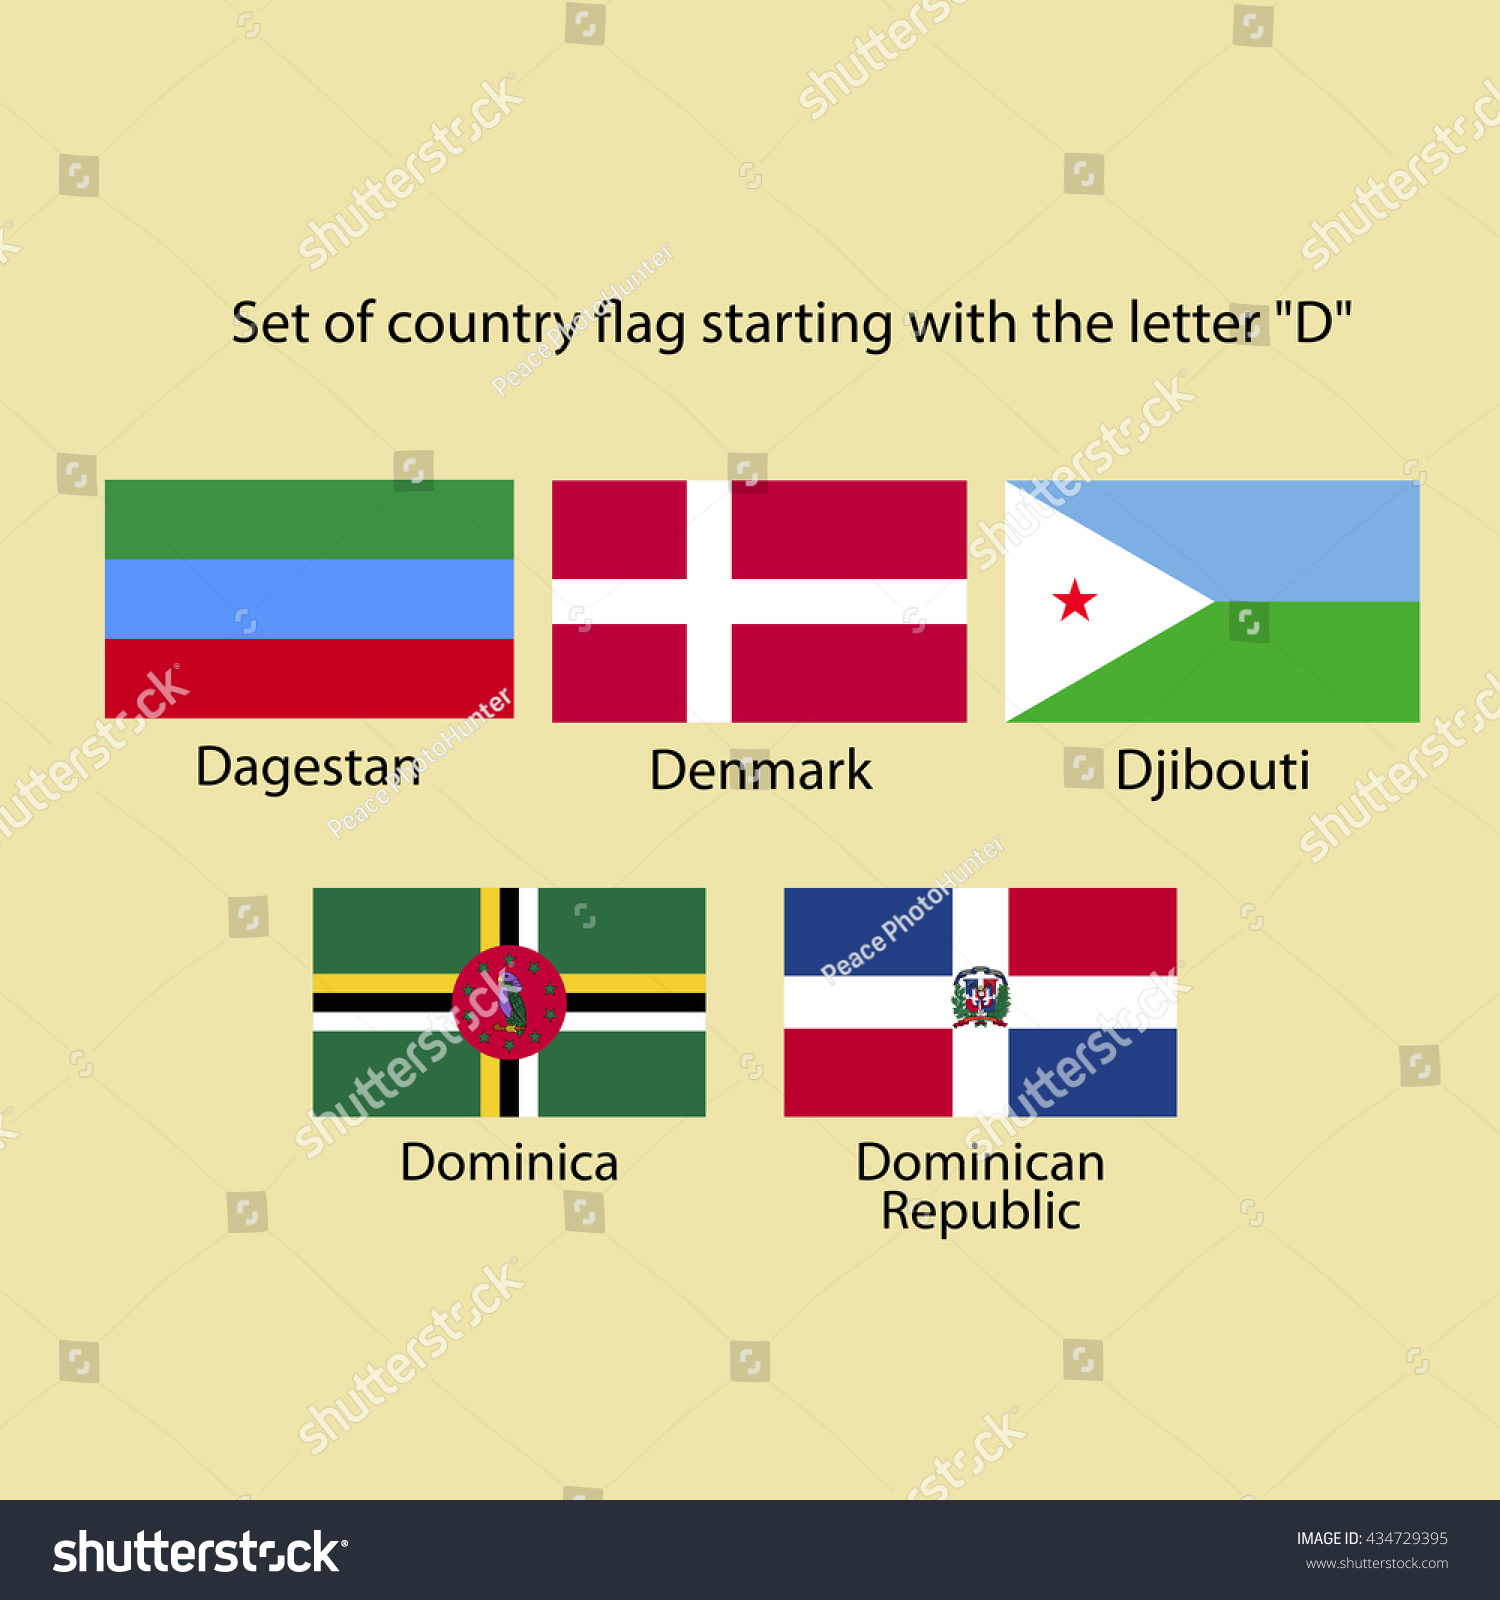 Country That Starts With The Letter D